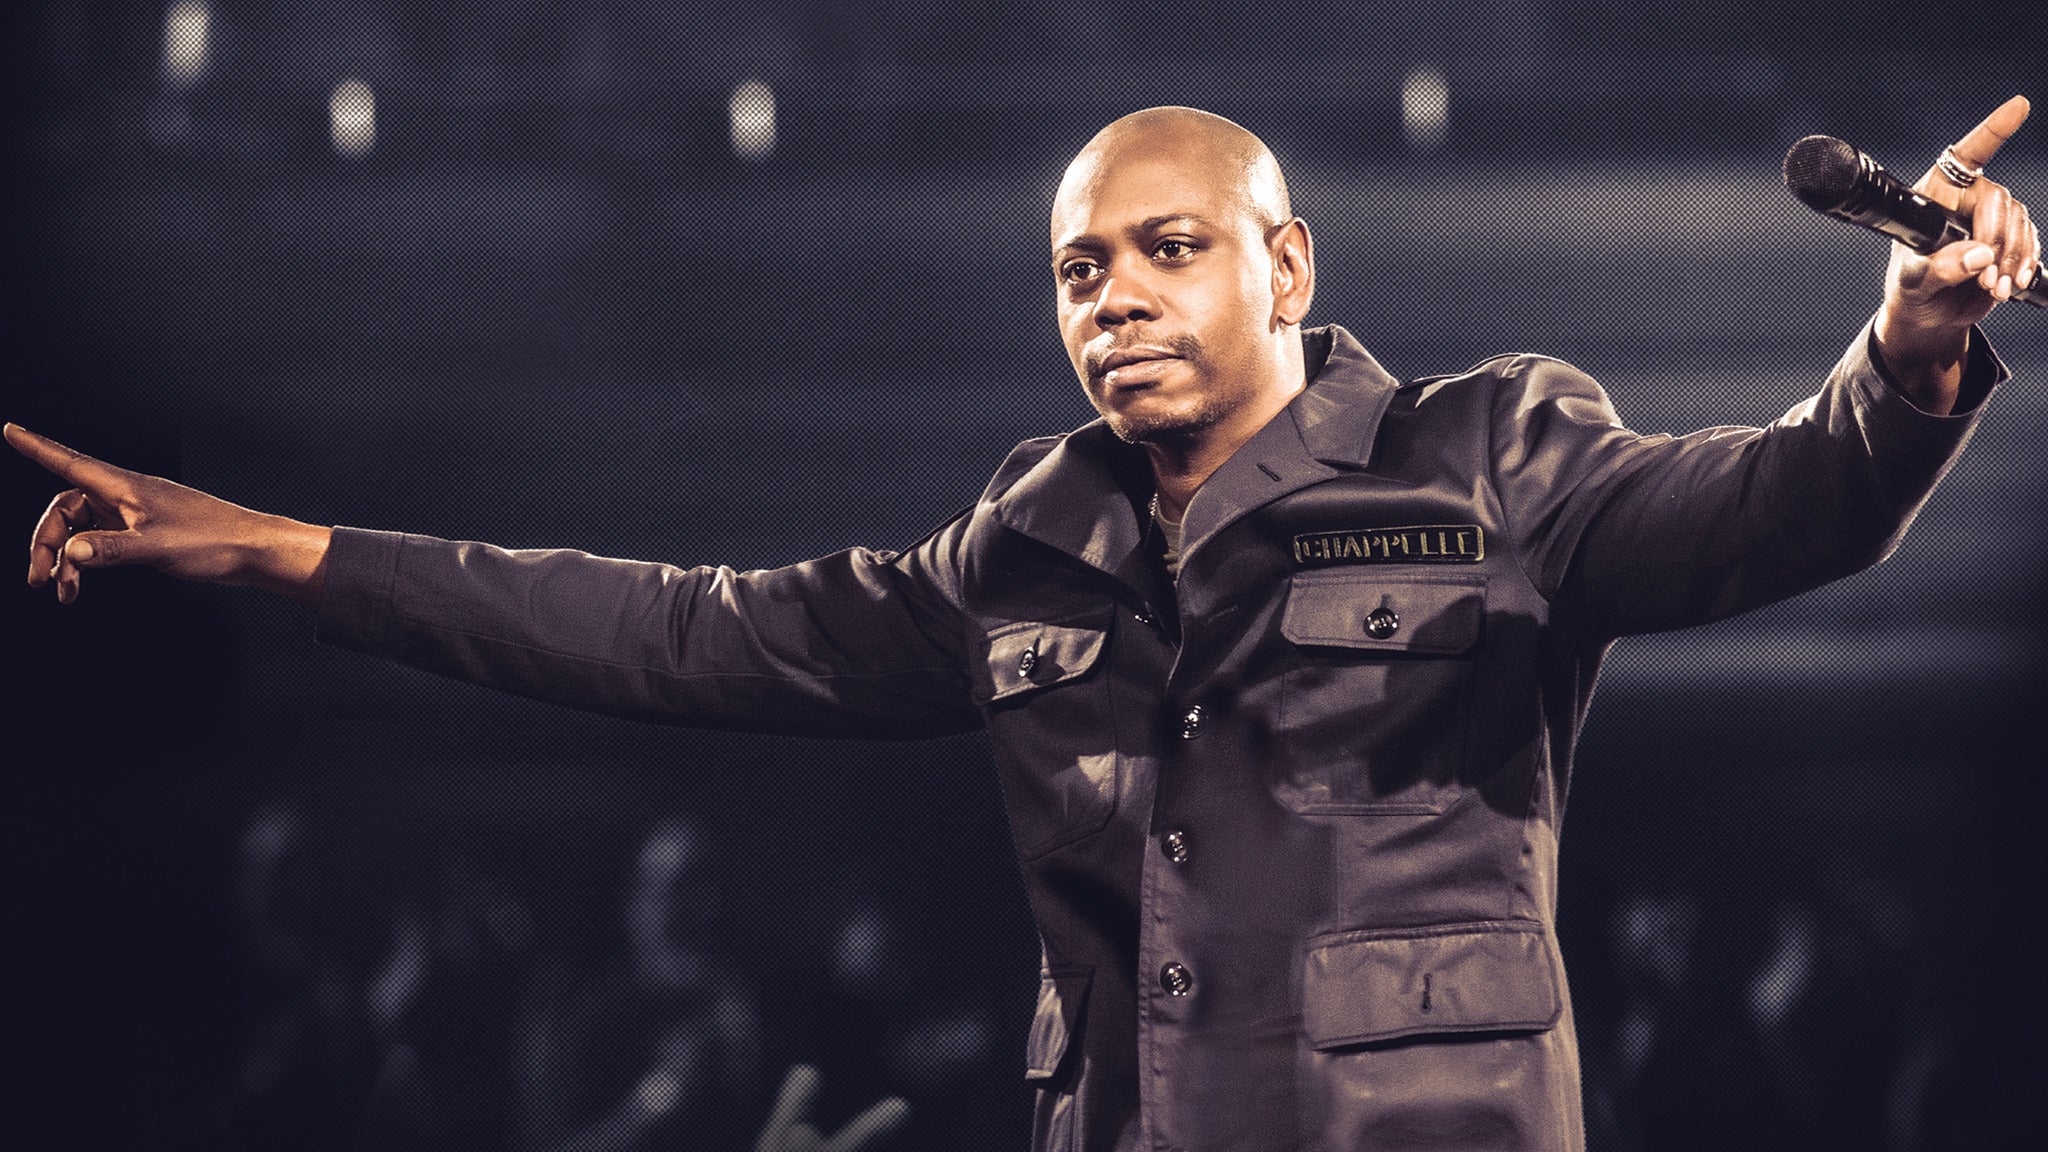 Image used with permission from Ticketmaster | Dave Chappelle tickets